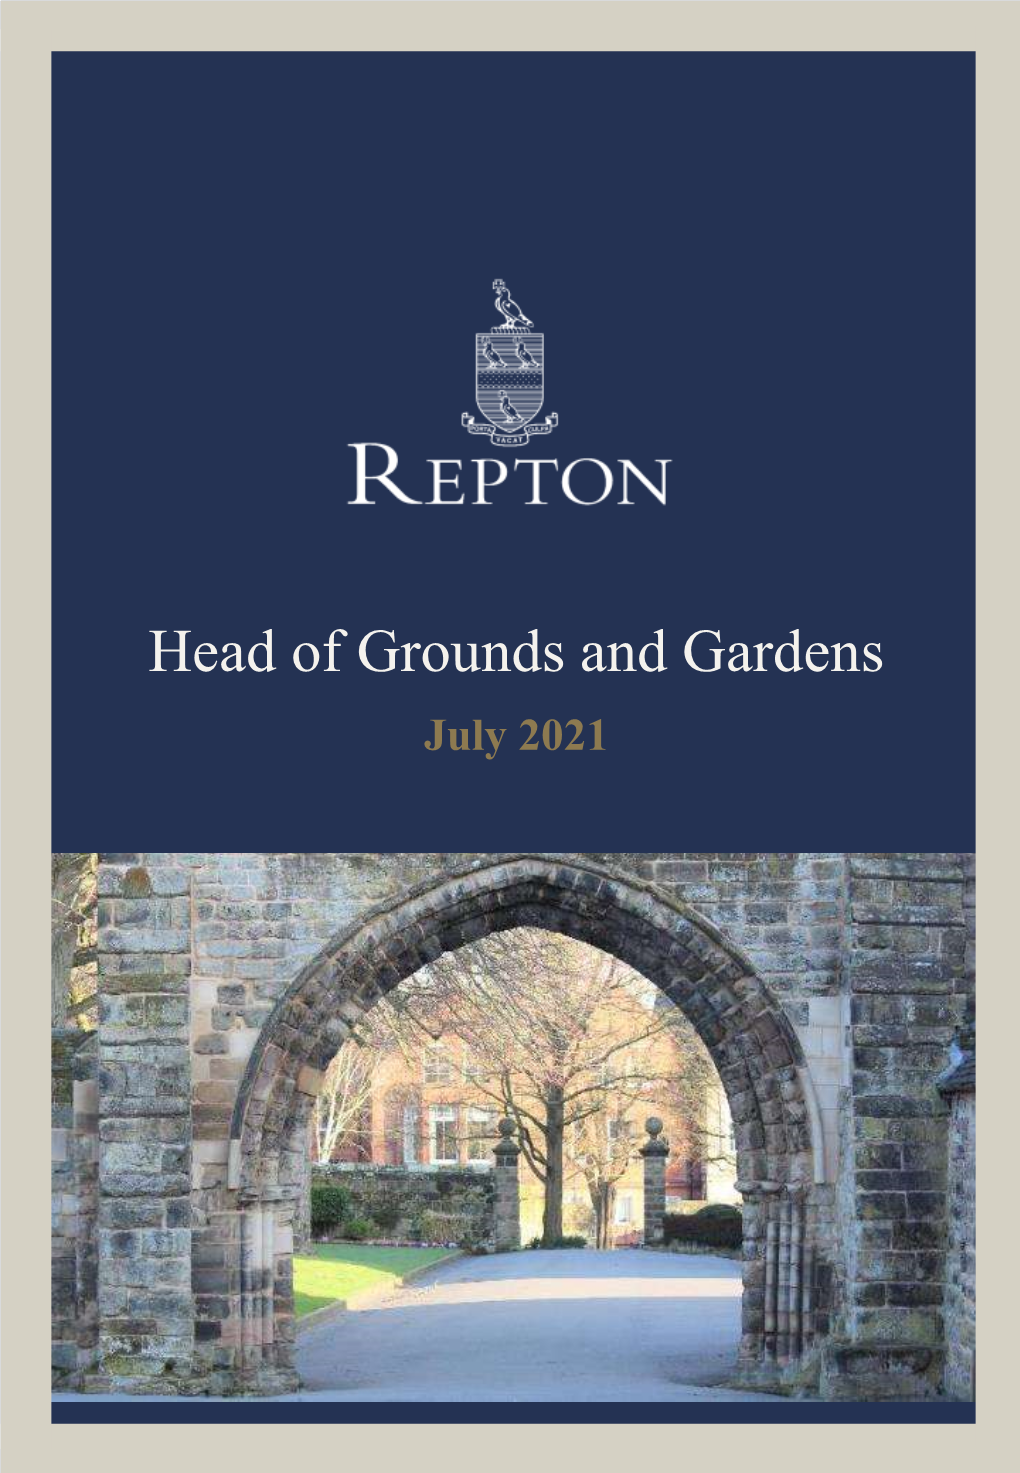 Head of Grounds and Gardens July 2021 JOB DESCRIPTION | HEAD of GROUNDS and GARDENS